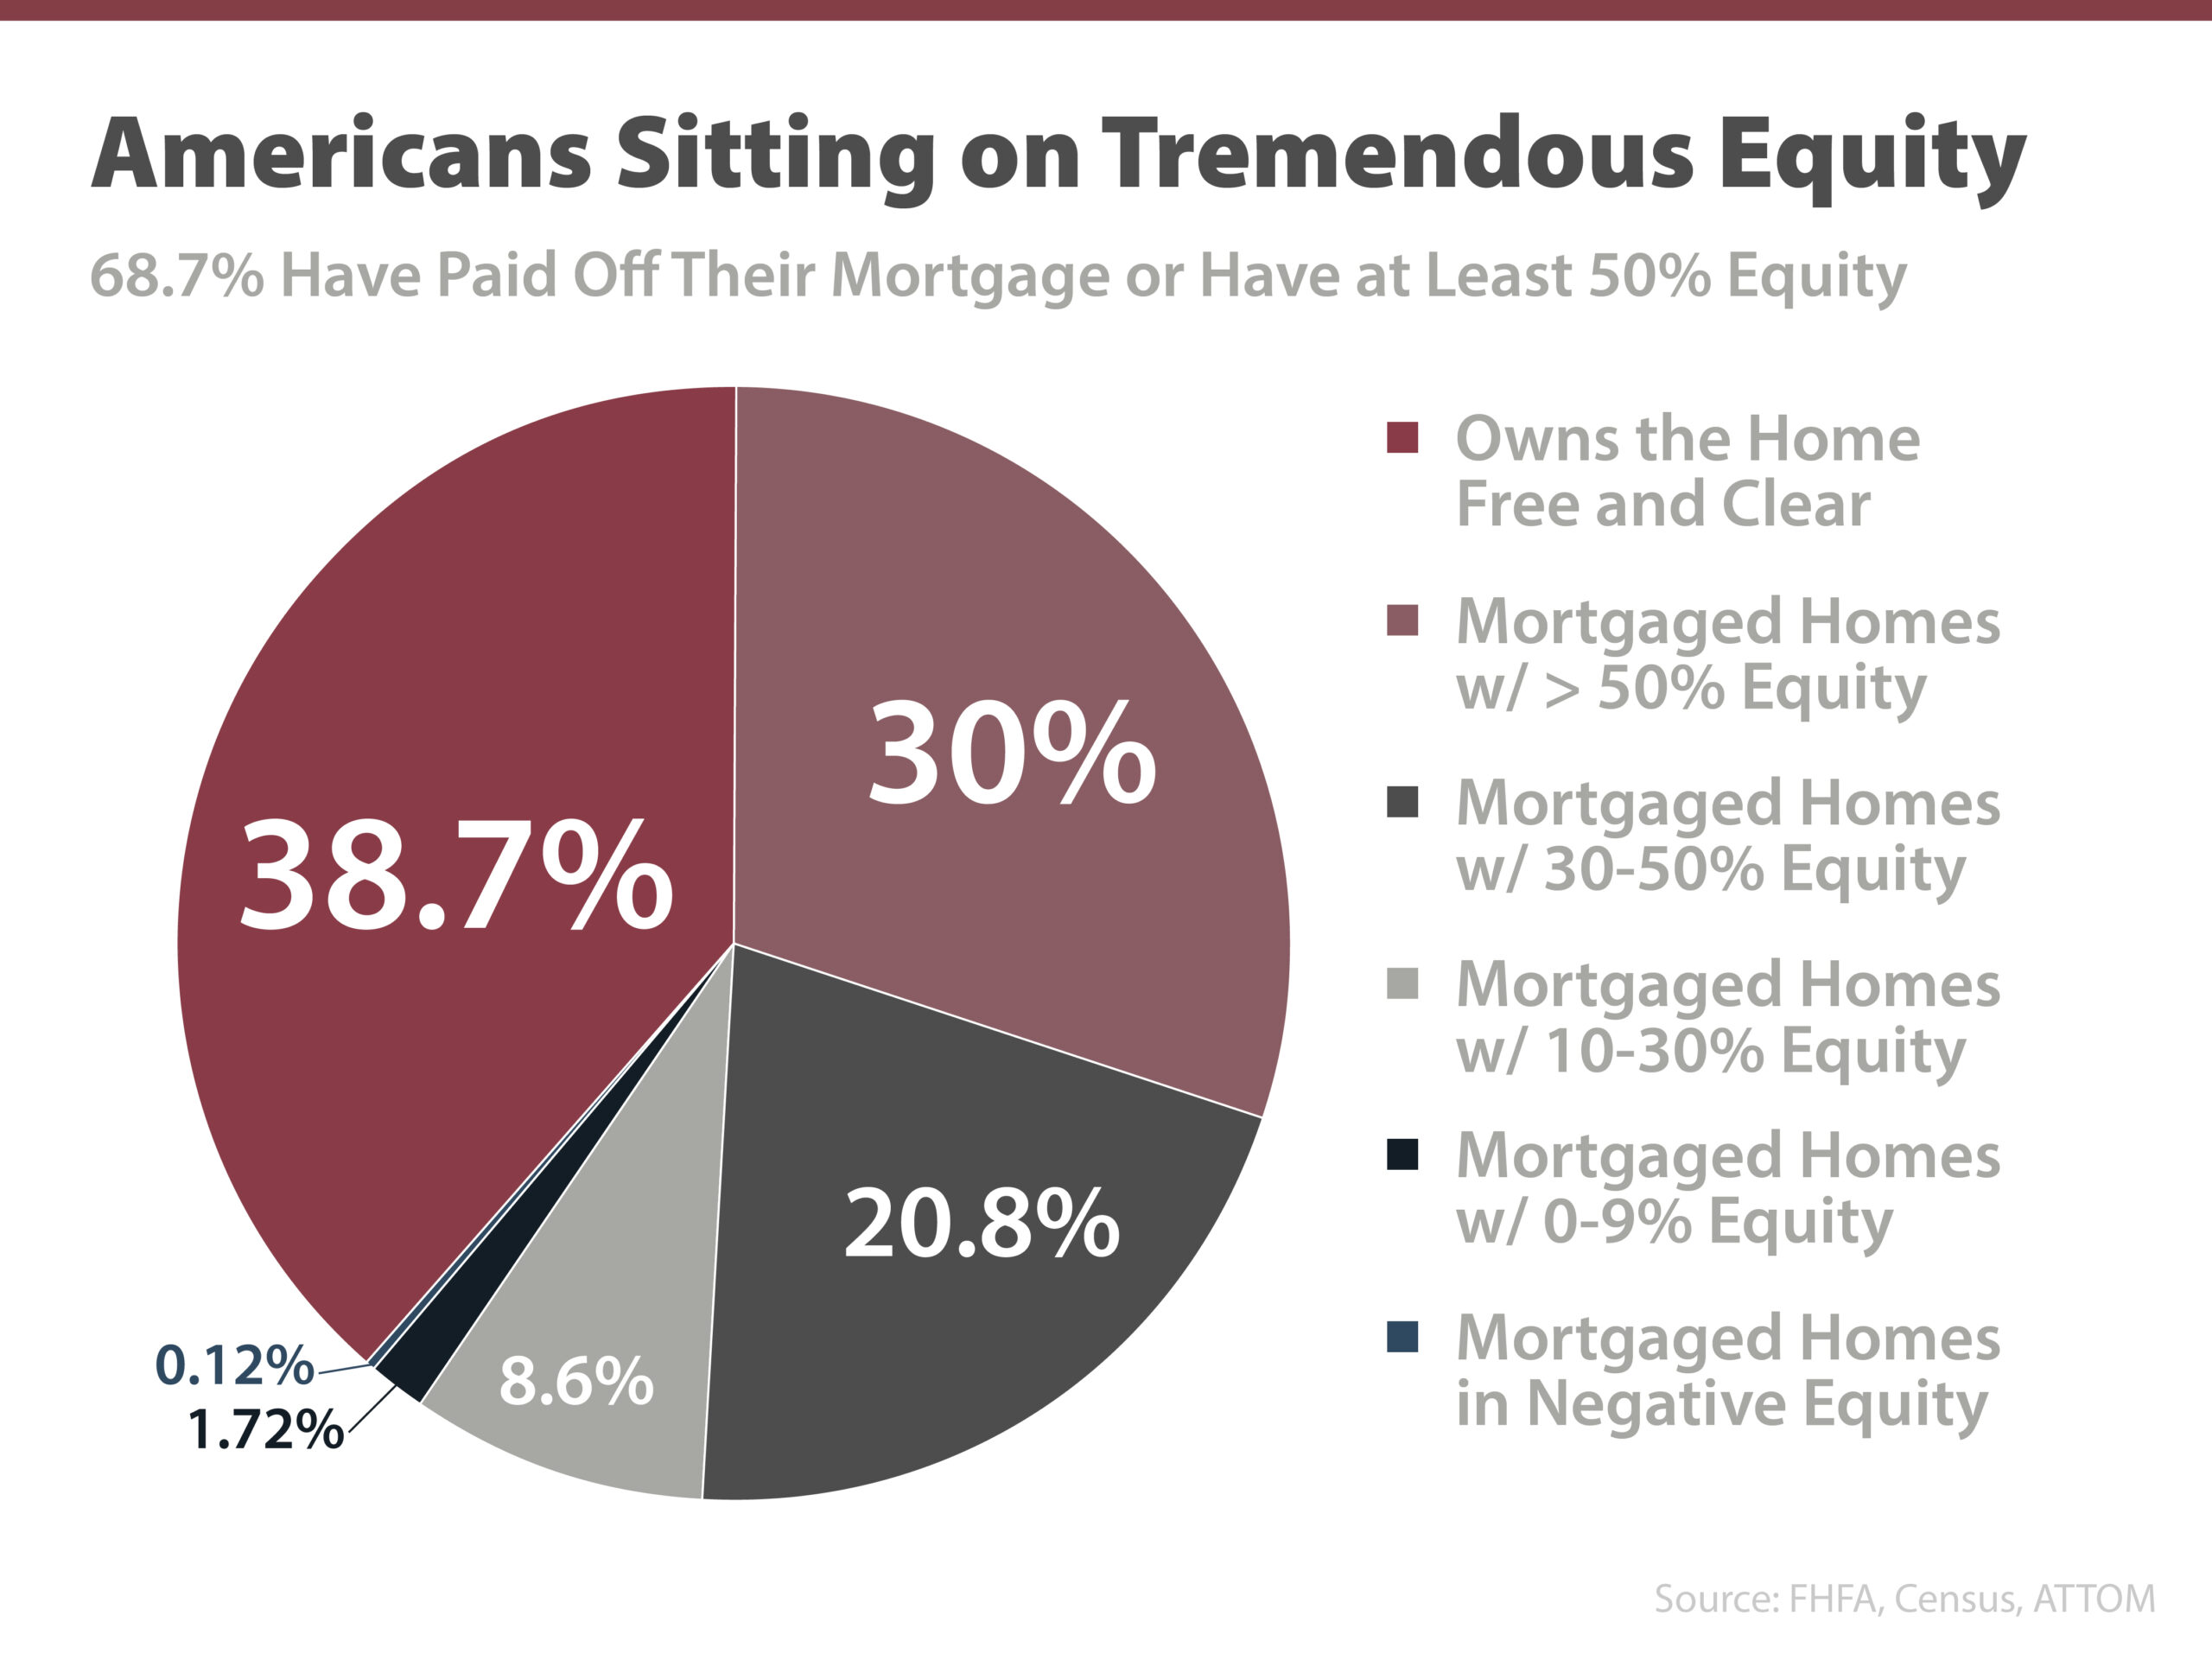 Americans Sitting on Tremendous Equity Pie Chart - 68.7% have paid off their mortgage or have at least 50% equity